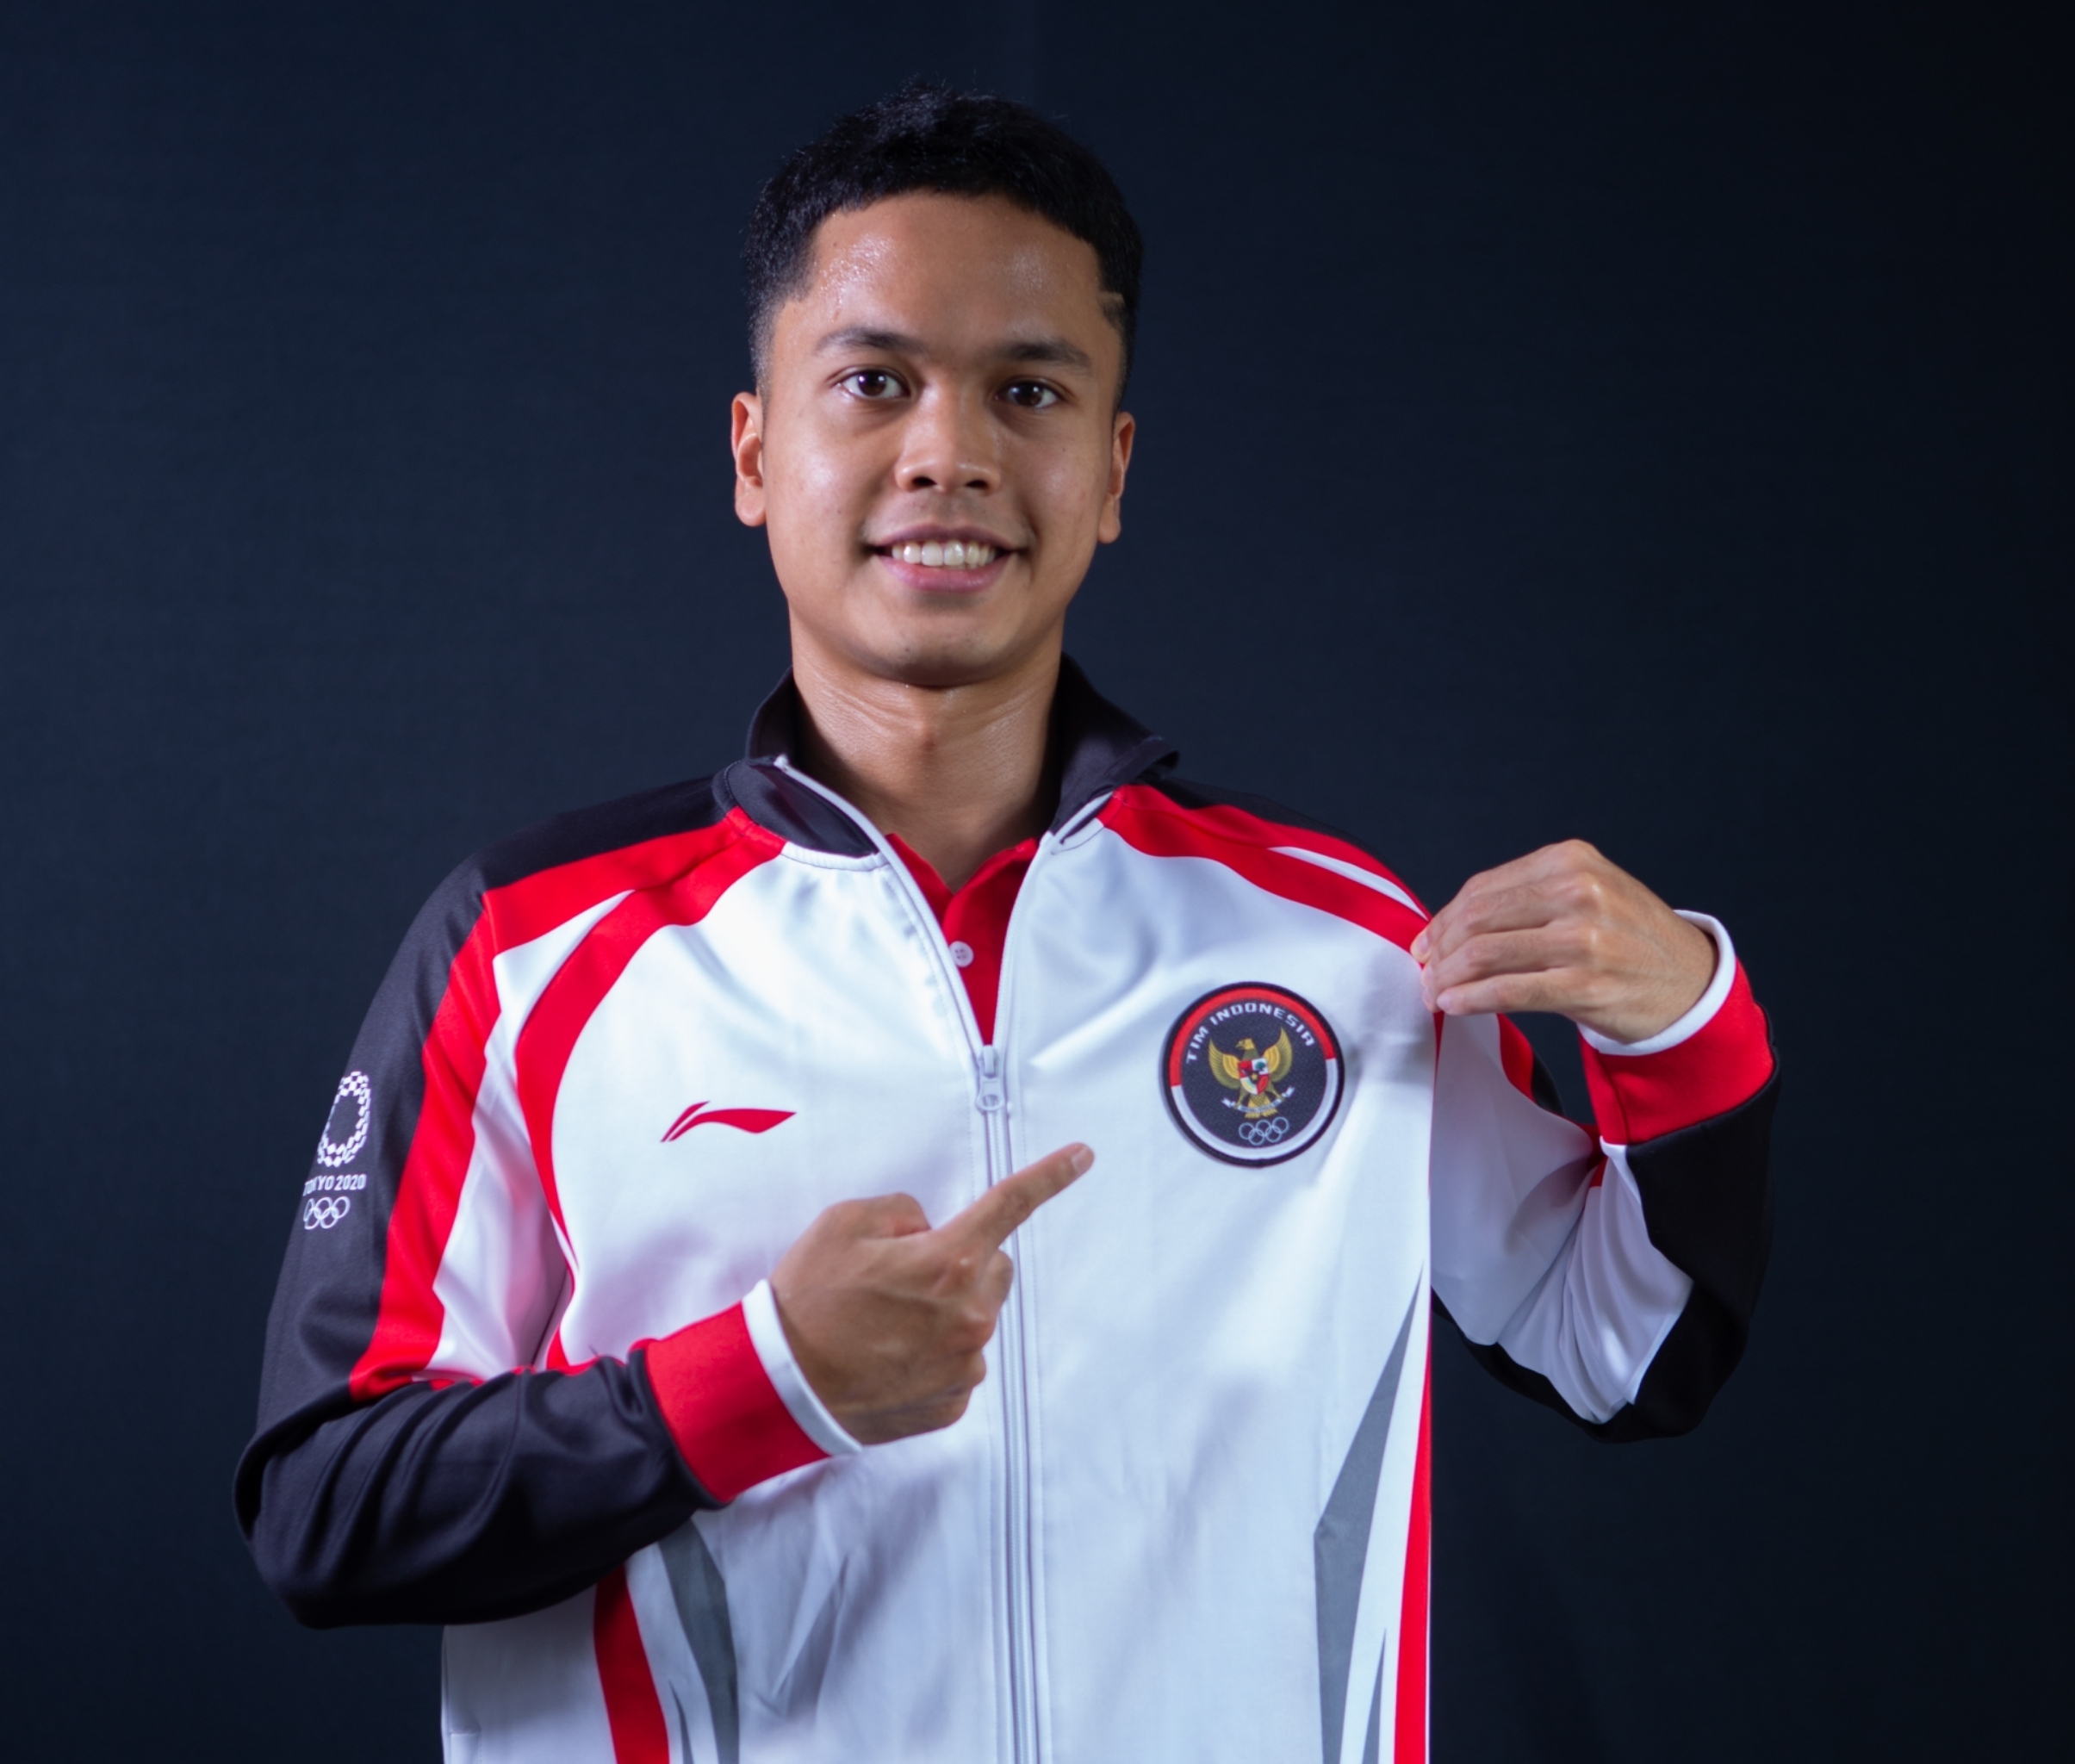 Link Live Streaming Bulu Tangkis Indonesia di Olimpiade Tokyo 2020: Anthony Sinisuka Ginting vs Gergely Krausz